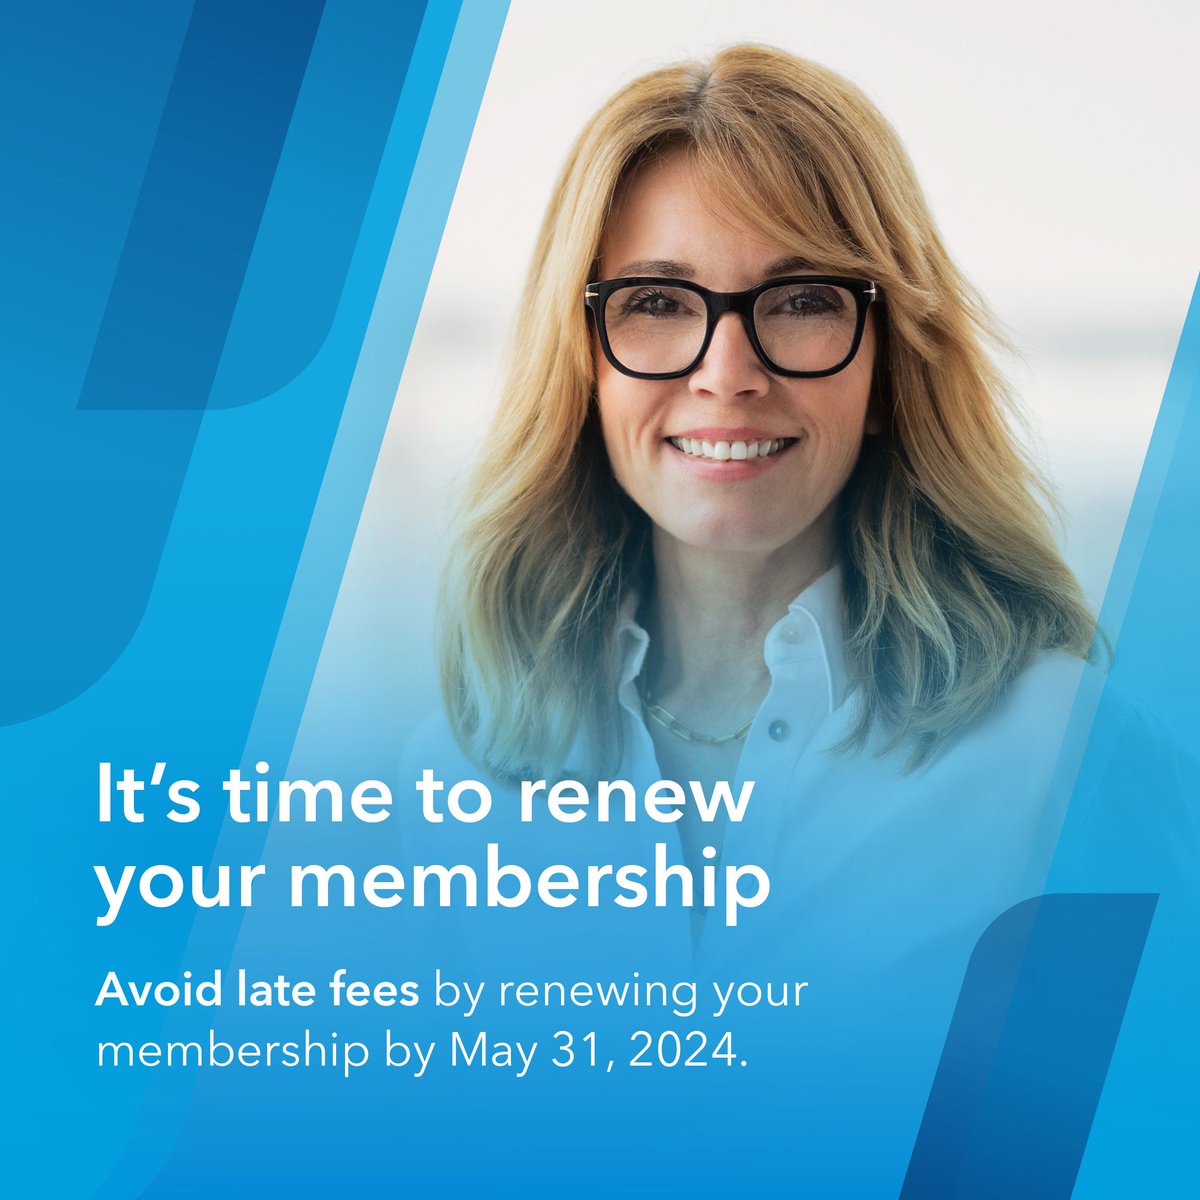 Hey members! It's time to renew your CPHR Manitoba membership for 2024-2025! Renew by April 30 and be entered to win a FREE registration to the next CPHR Manitoba conference. Renew your membership here: buff.ly/48IgjI9